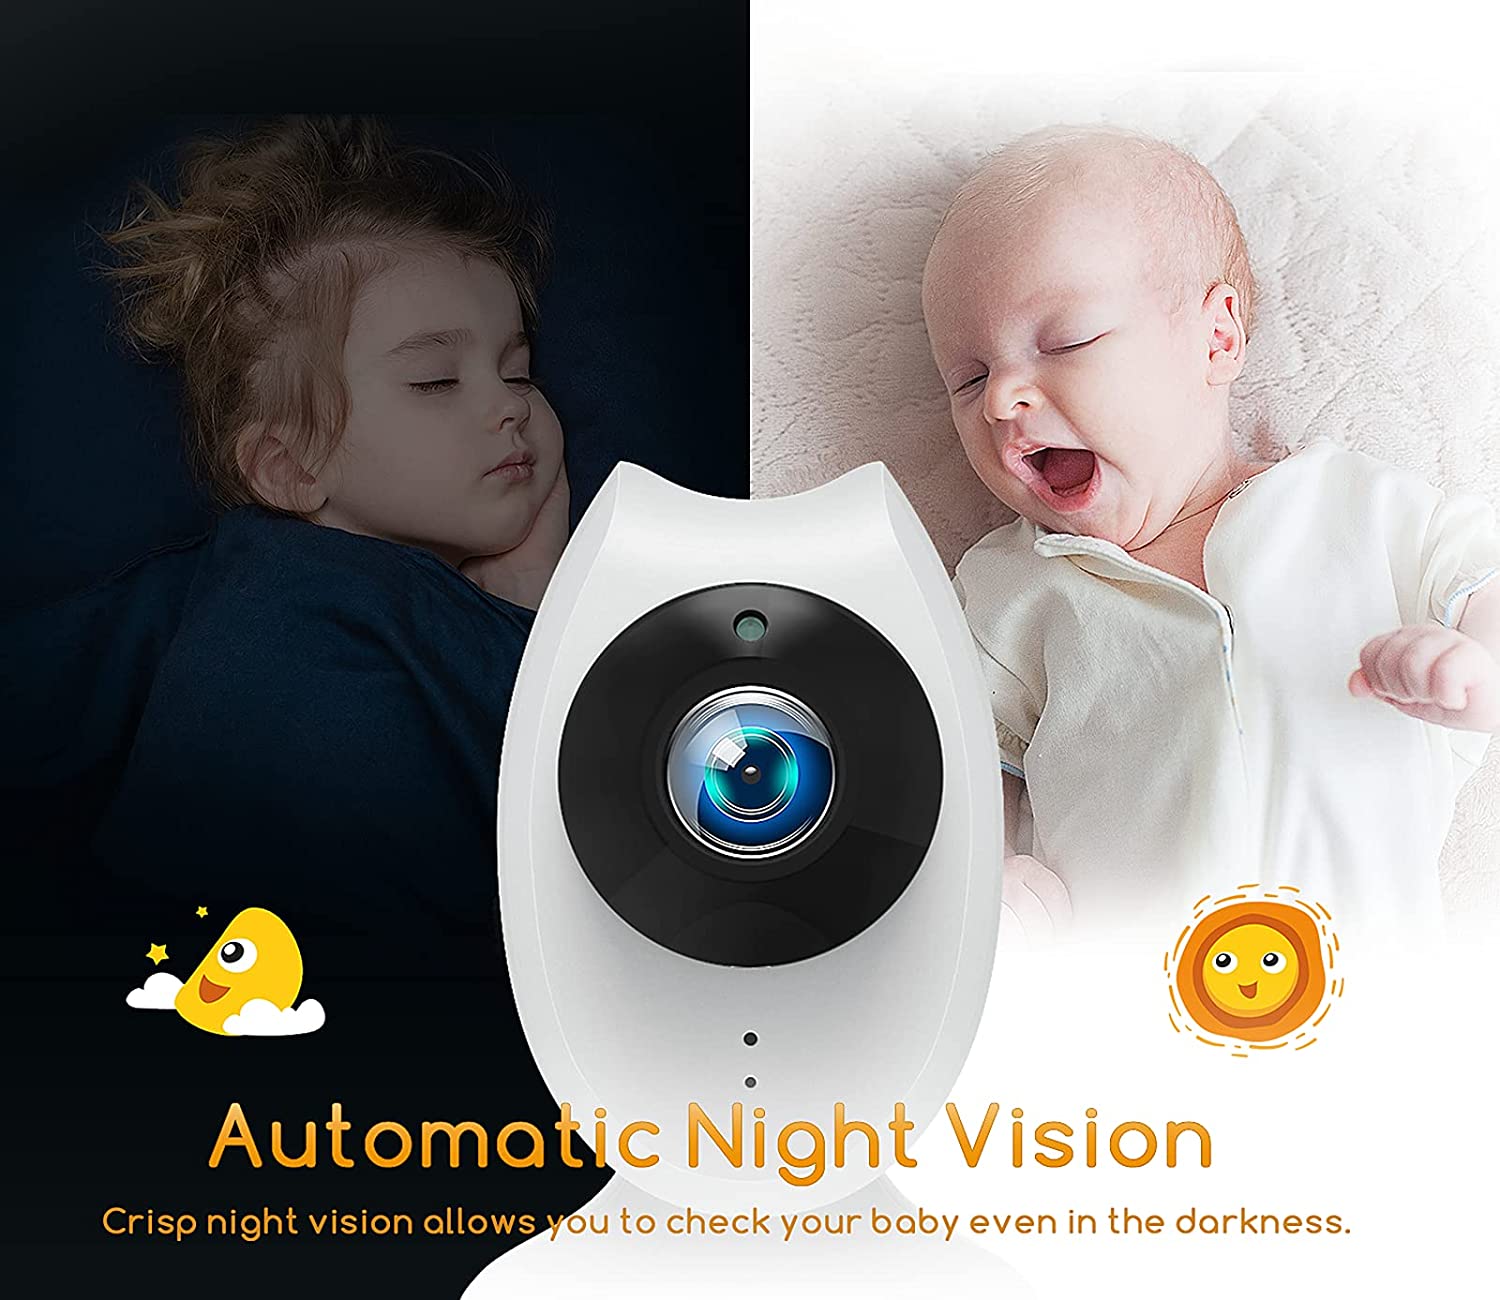 Campark BM41 Baby camera's day vision and night vision